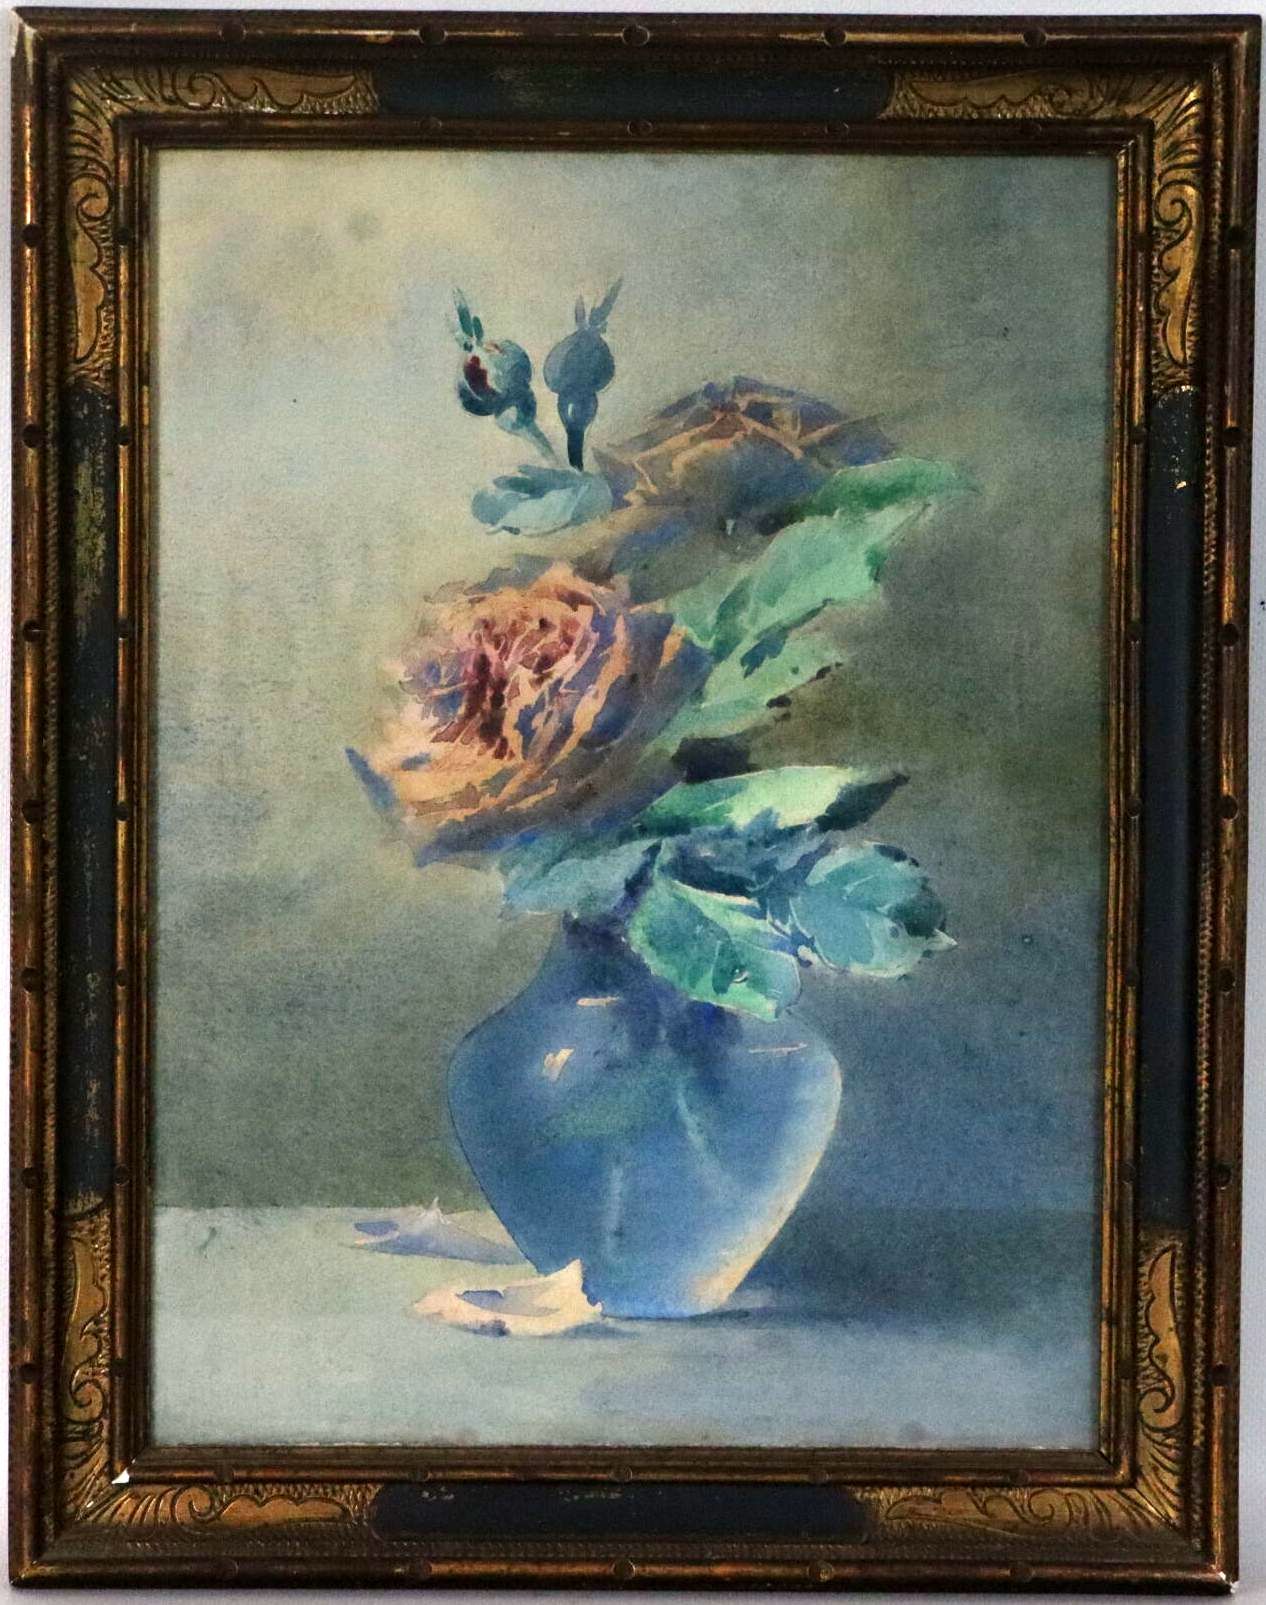 Null Blanche ODIN (1865-1957), attributed to.
Rose in a glass vase
Watercolor on&hellip;